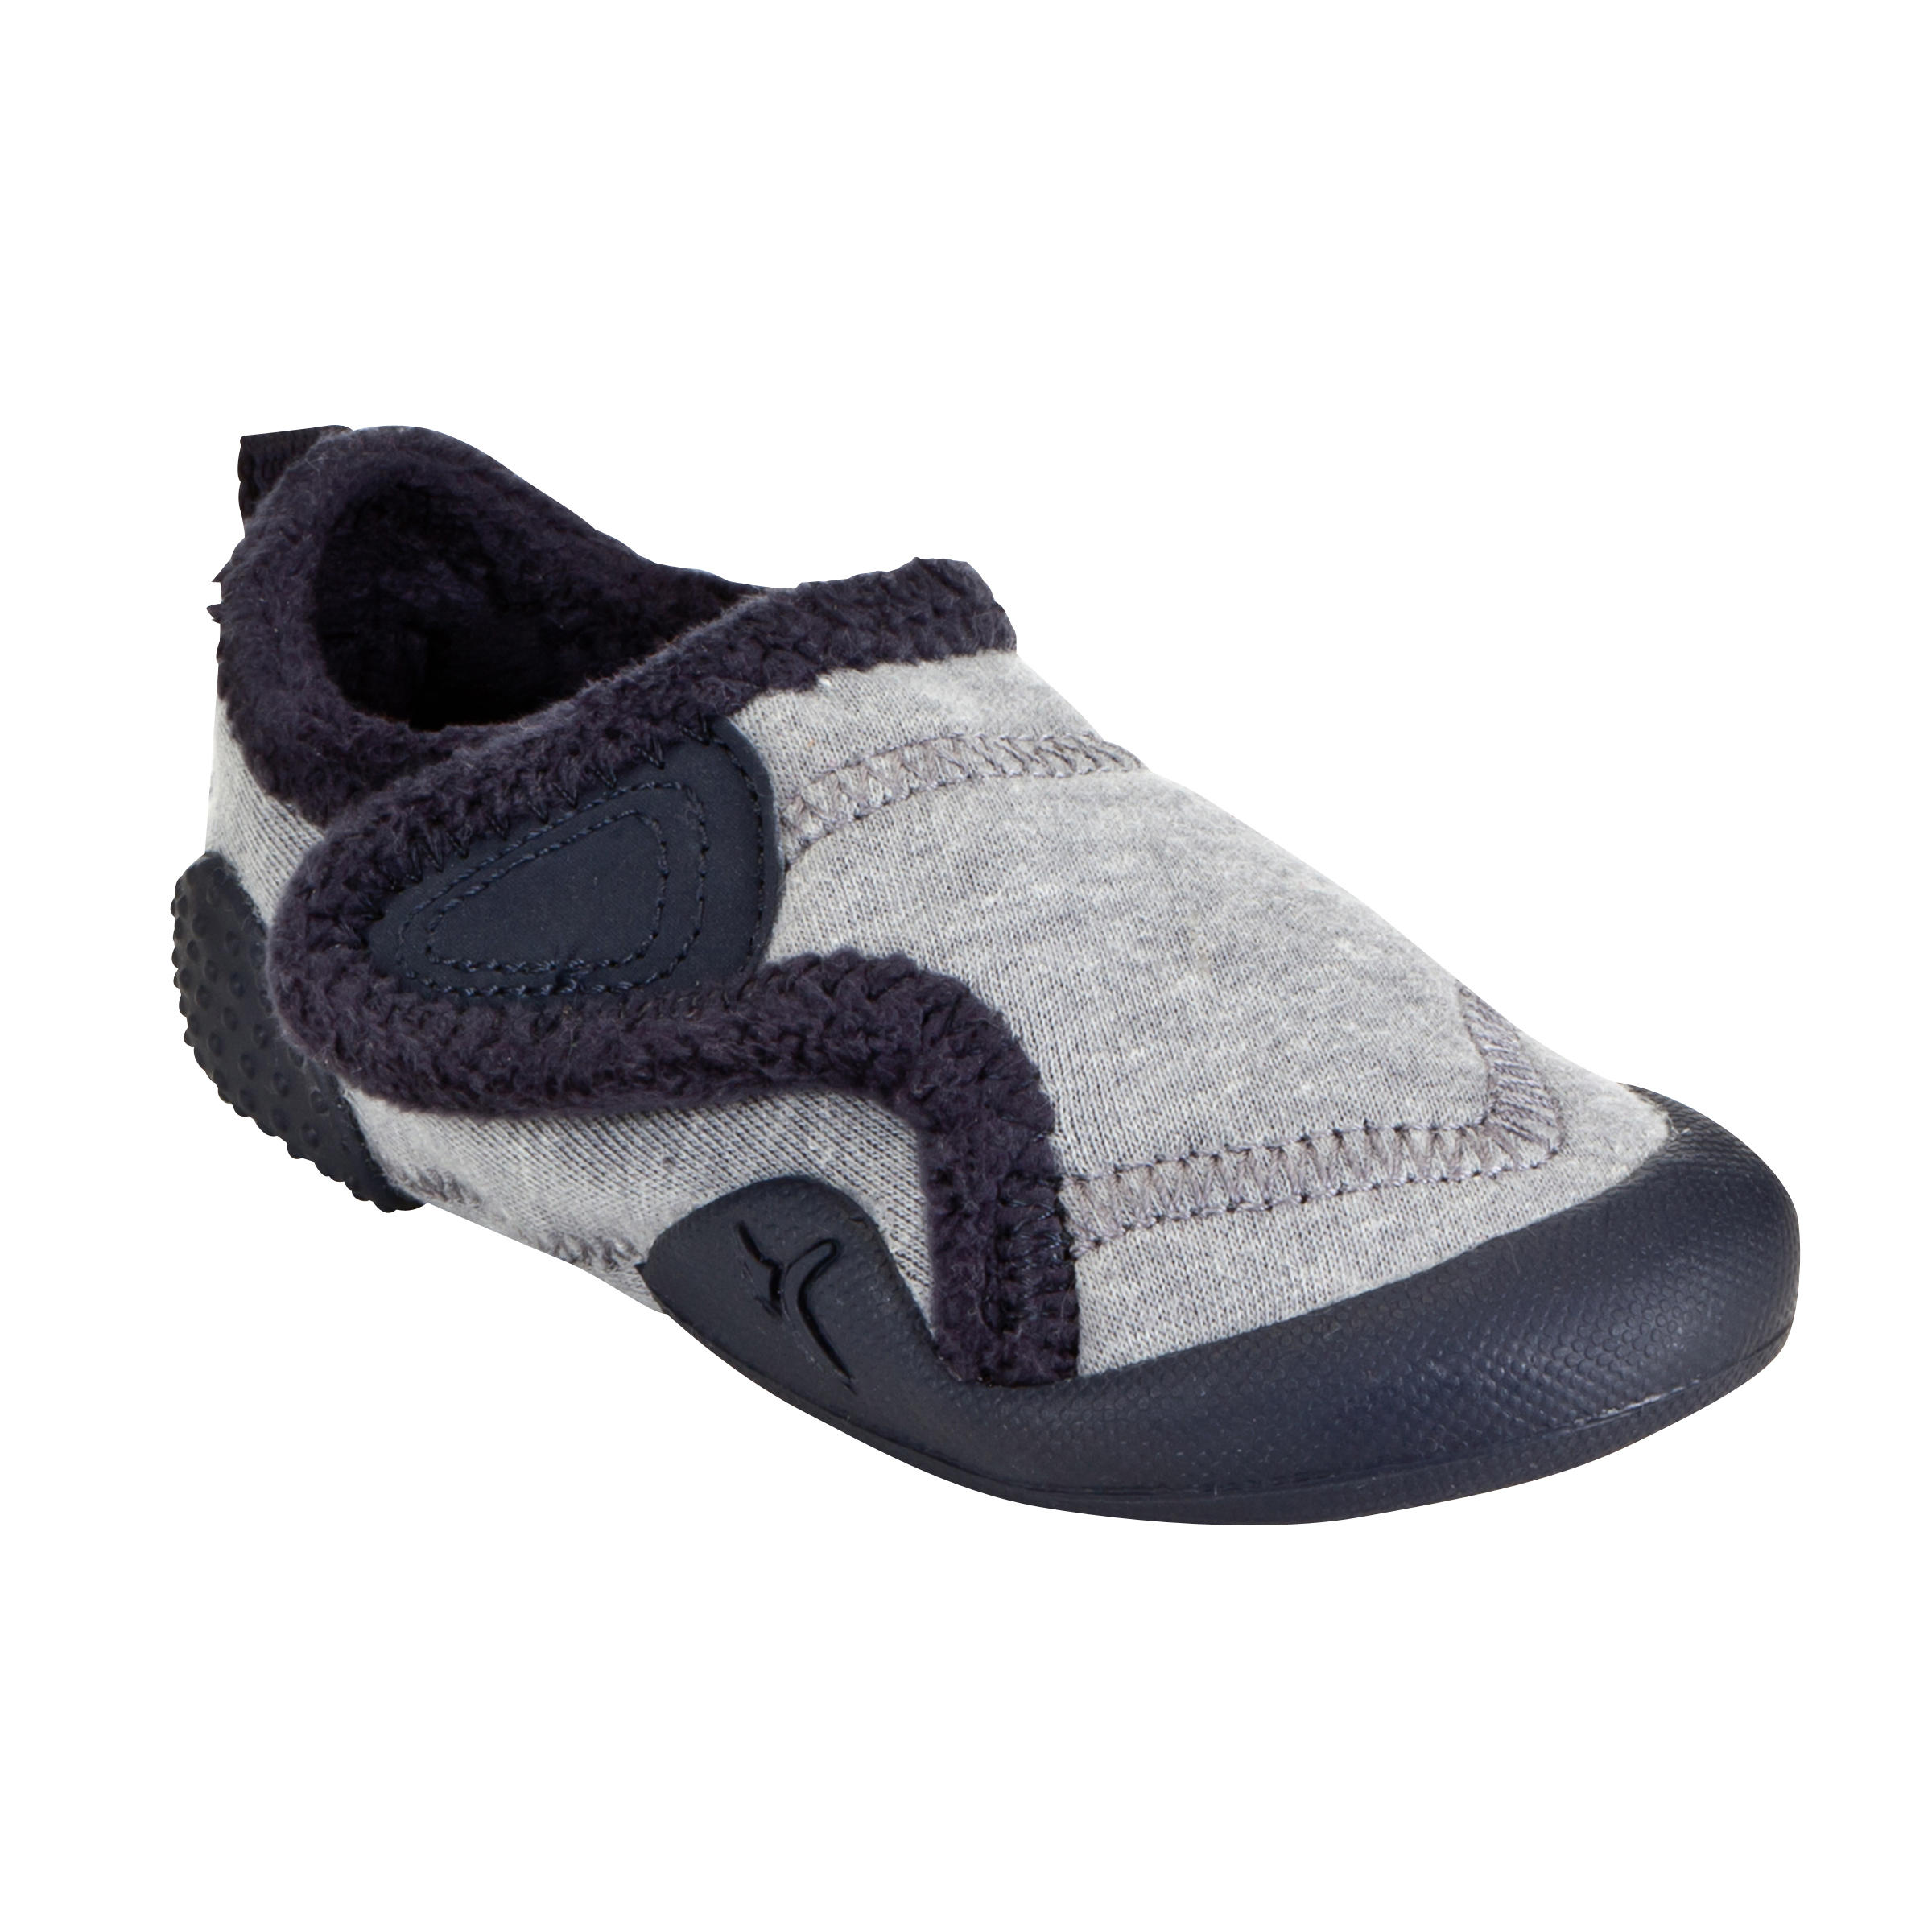 DOMYOS Light lined baby gym shoes - mottled grey/navy